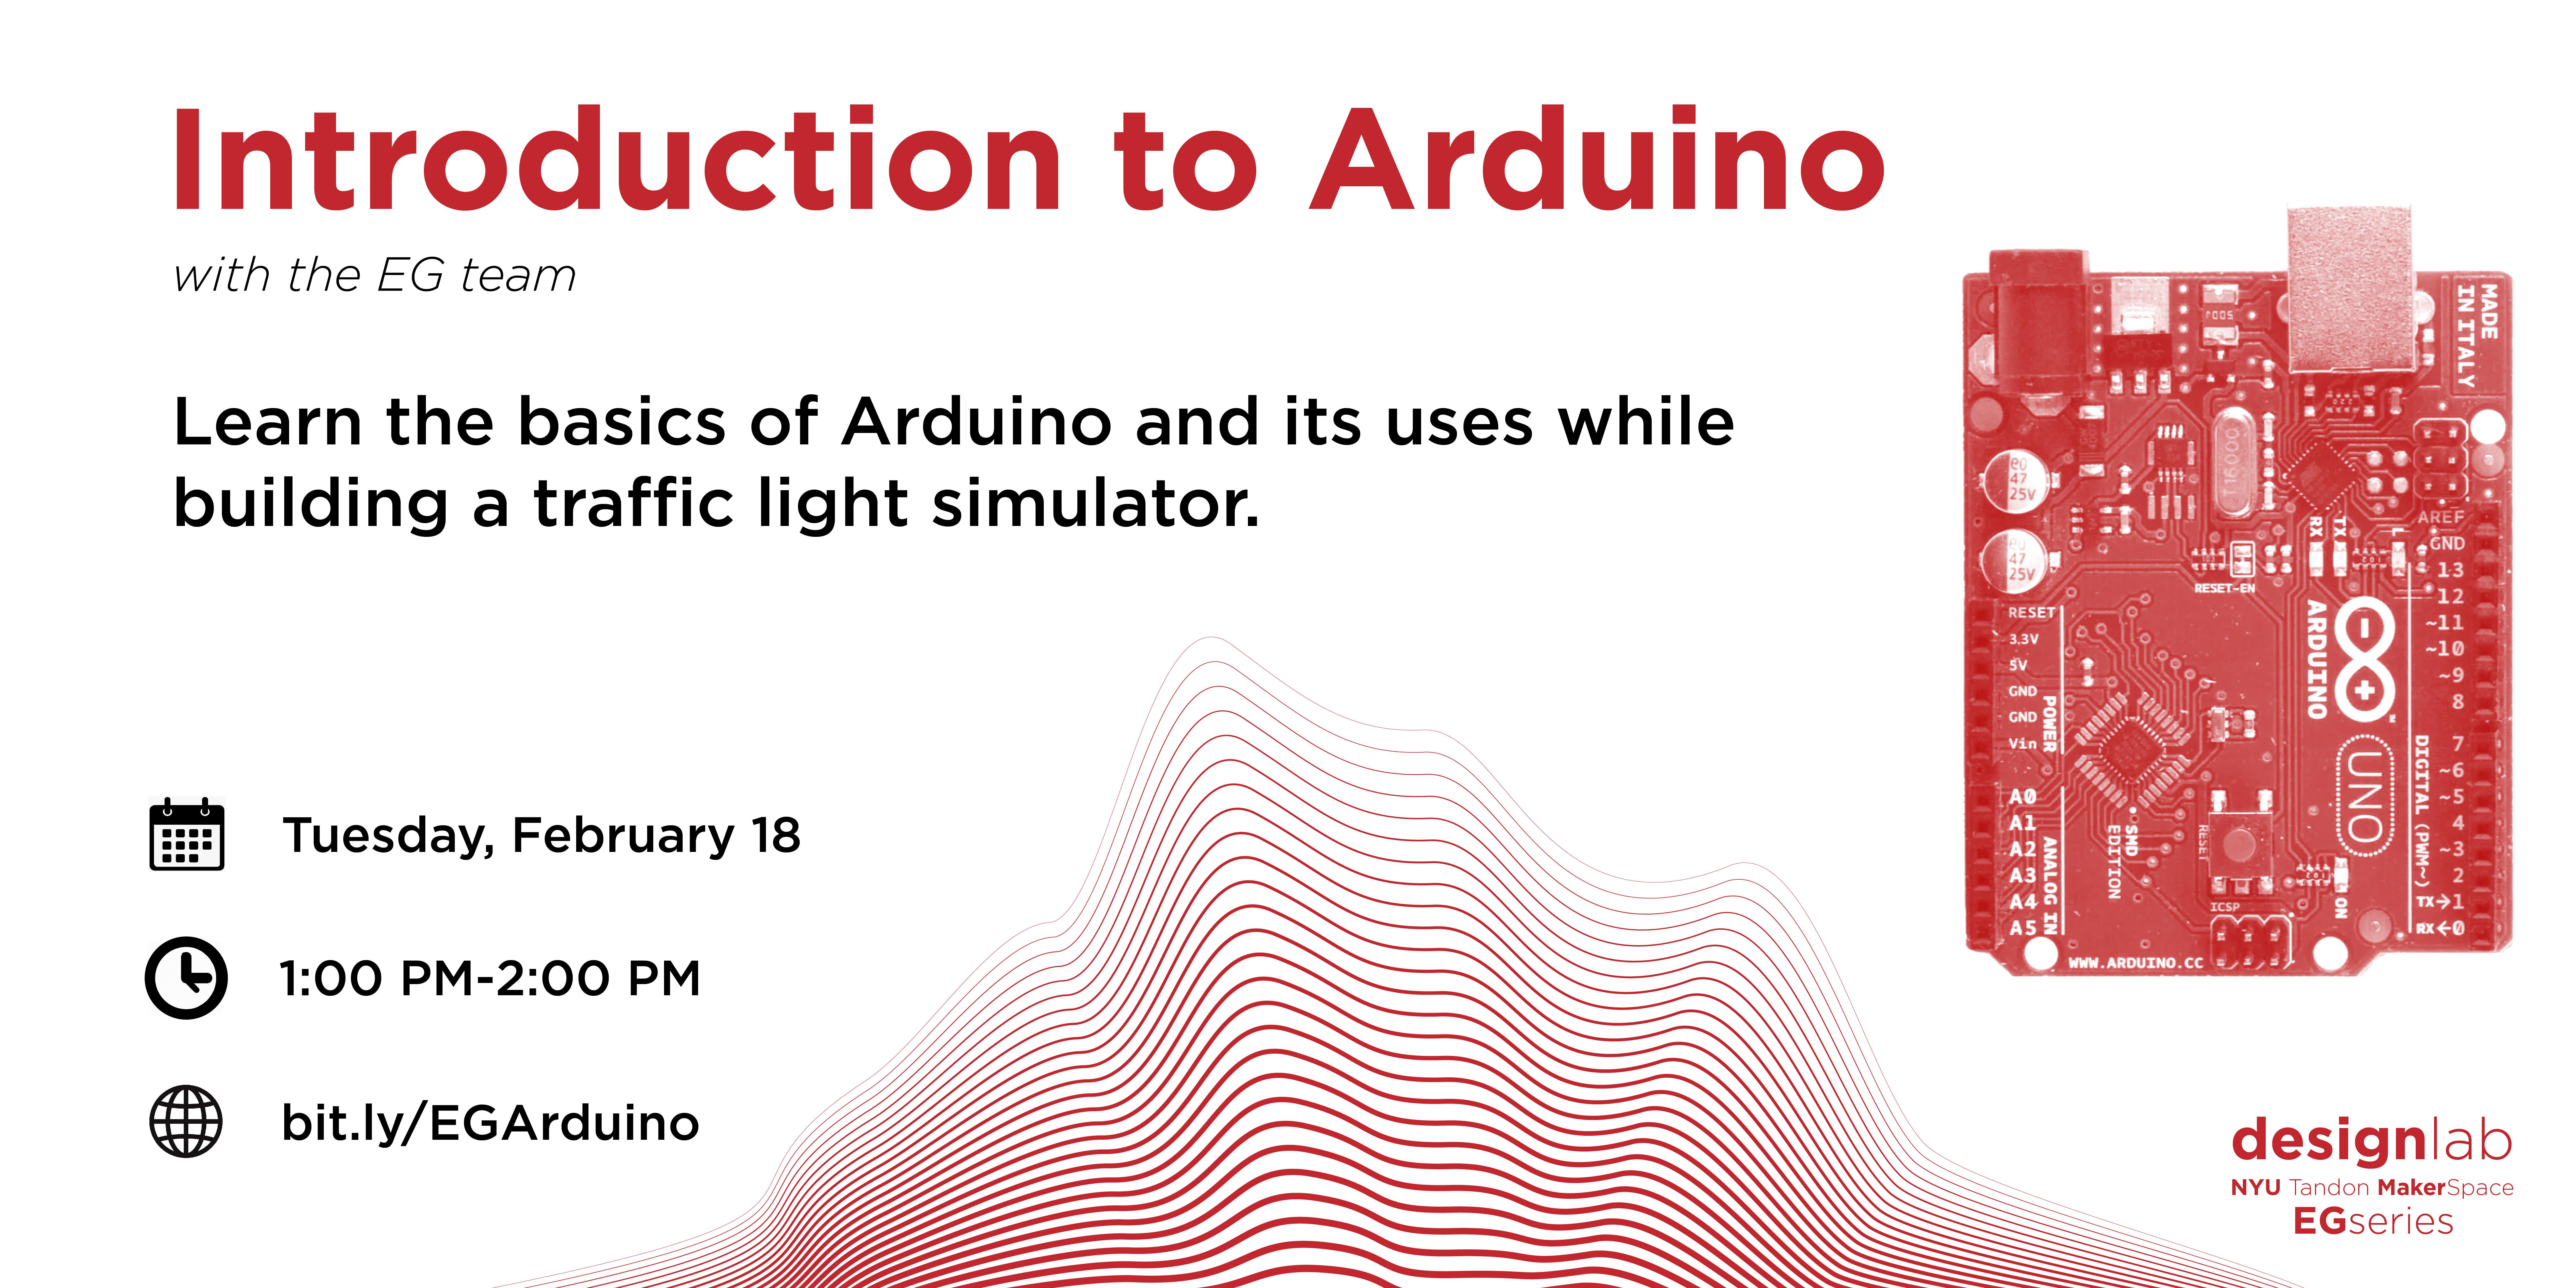 EG Series: Introduction to Arduino